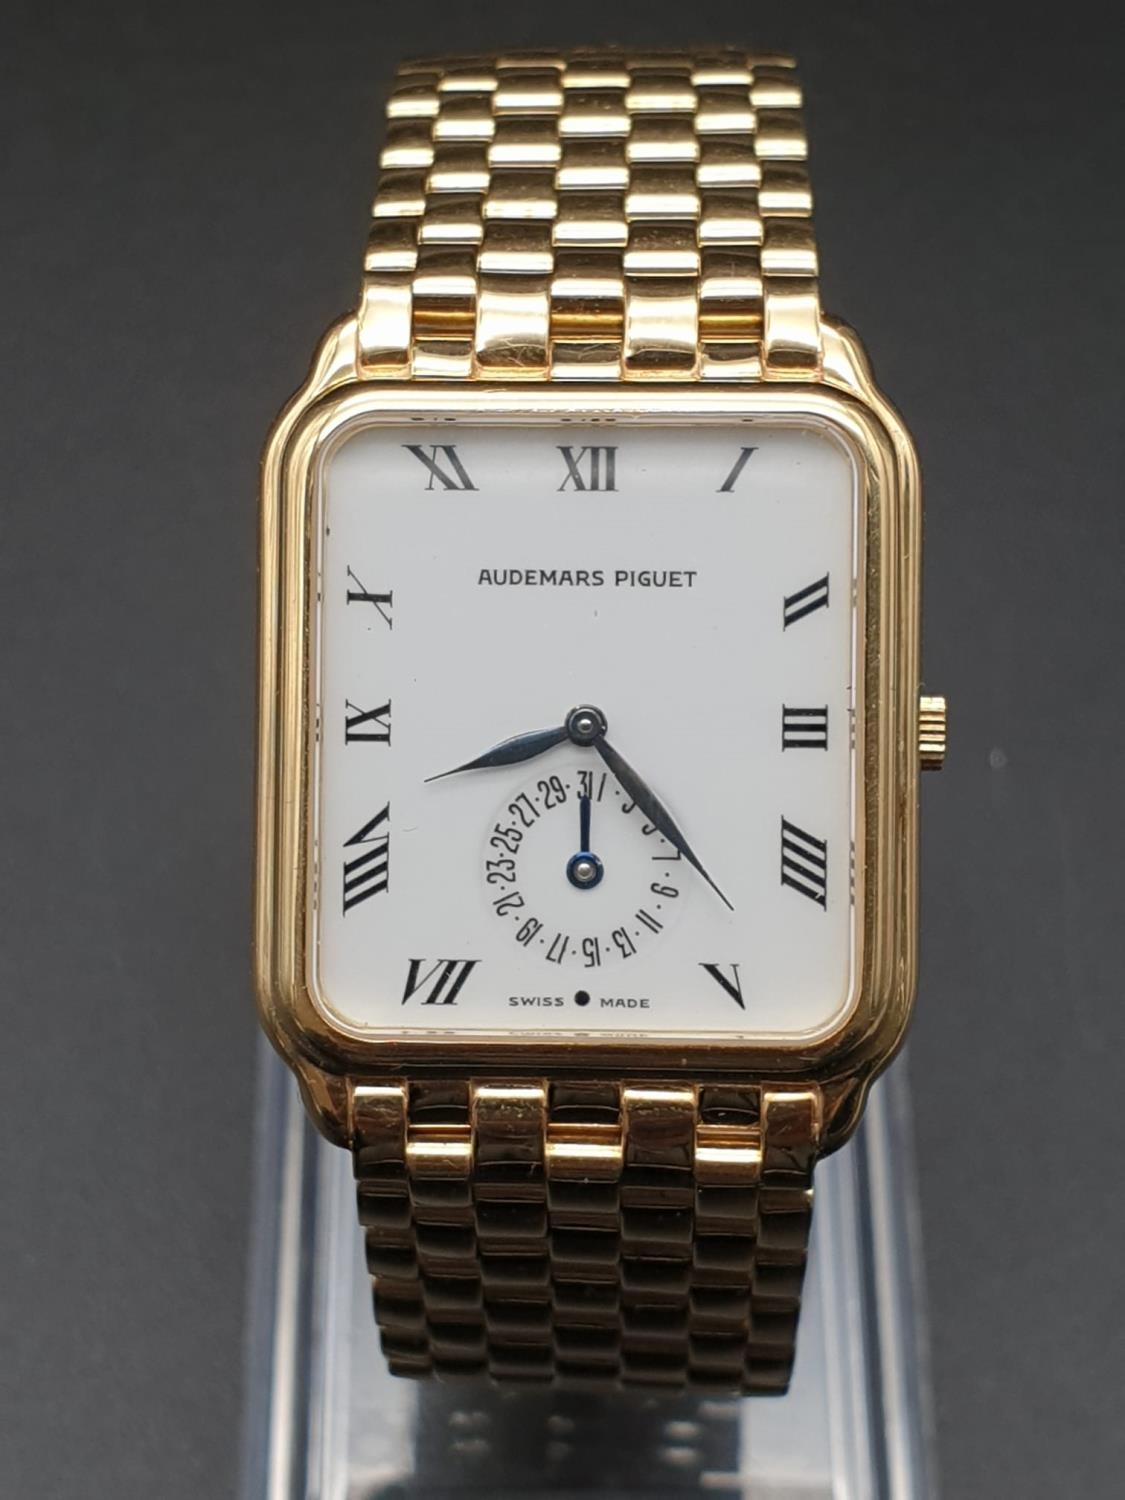 AUDEMARS PIGUET 18K GOLD WATCH WITH GOLD STRAP, SQUARE FACE AND MANUAL MOVEMENT. 26MM